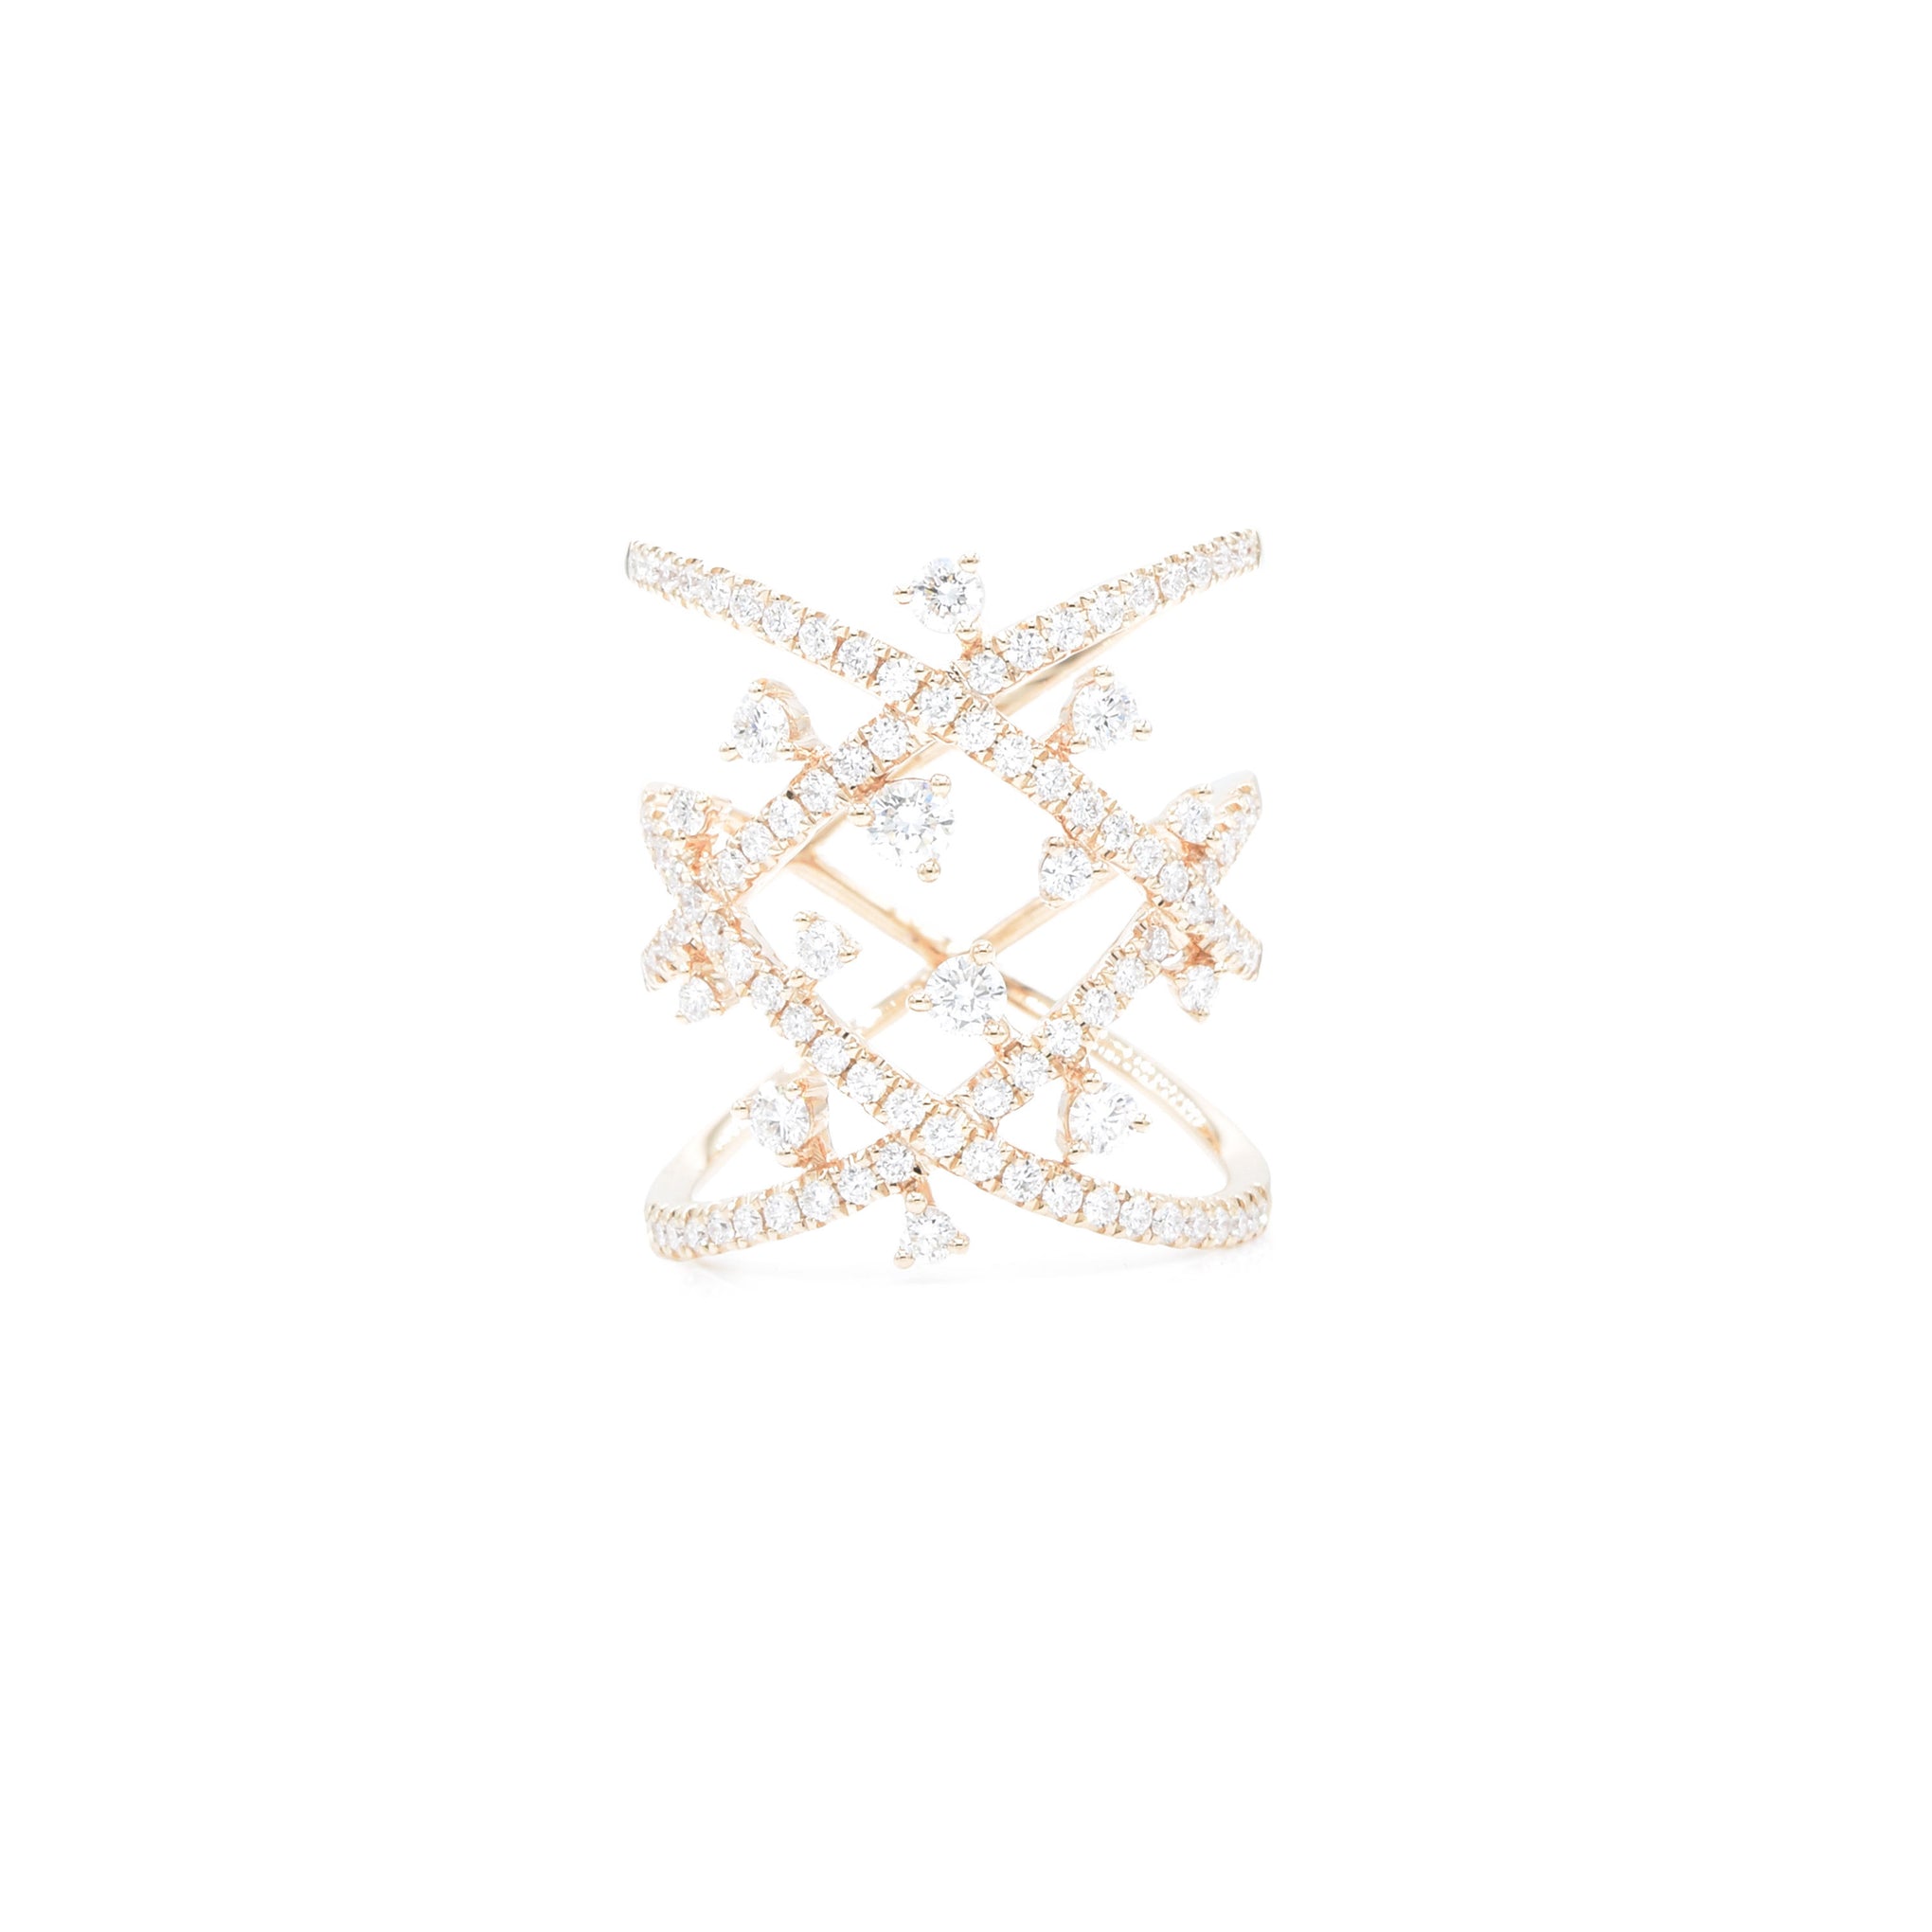 18KT Rose Gold And Diamond Criss-Cross Ring